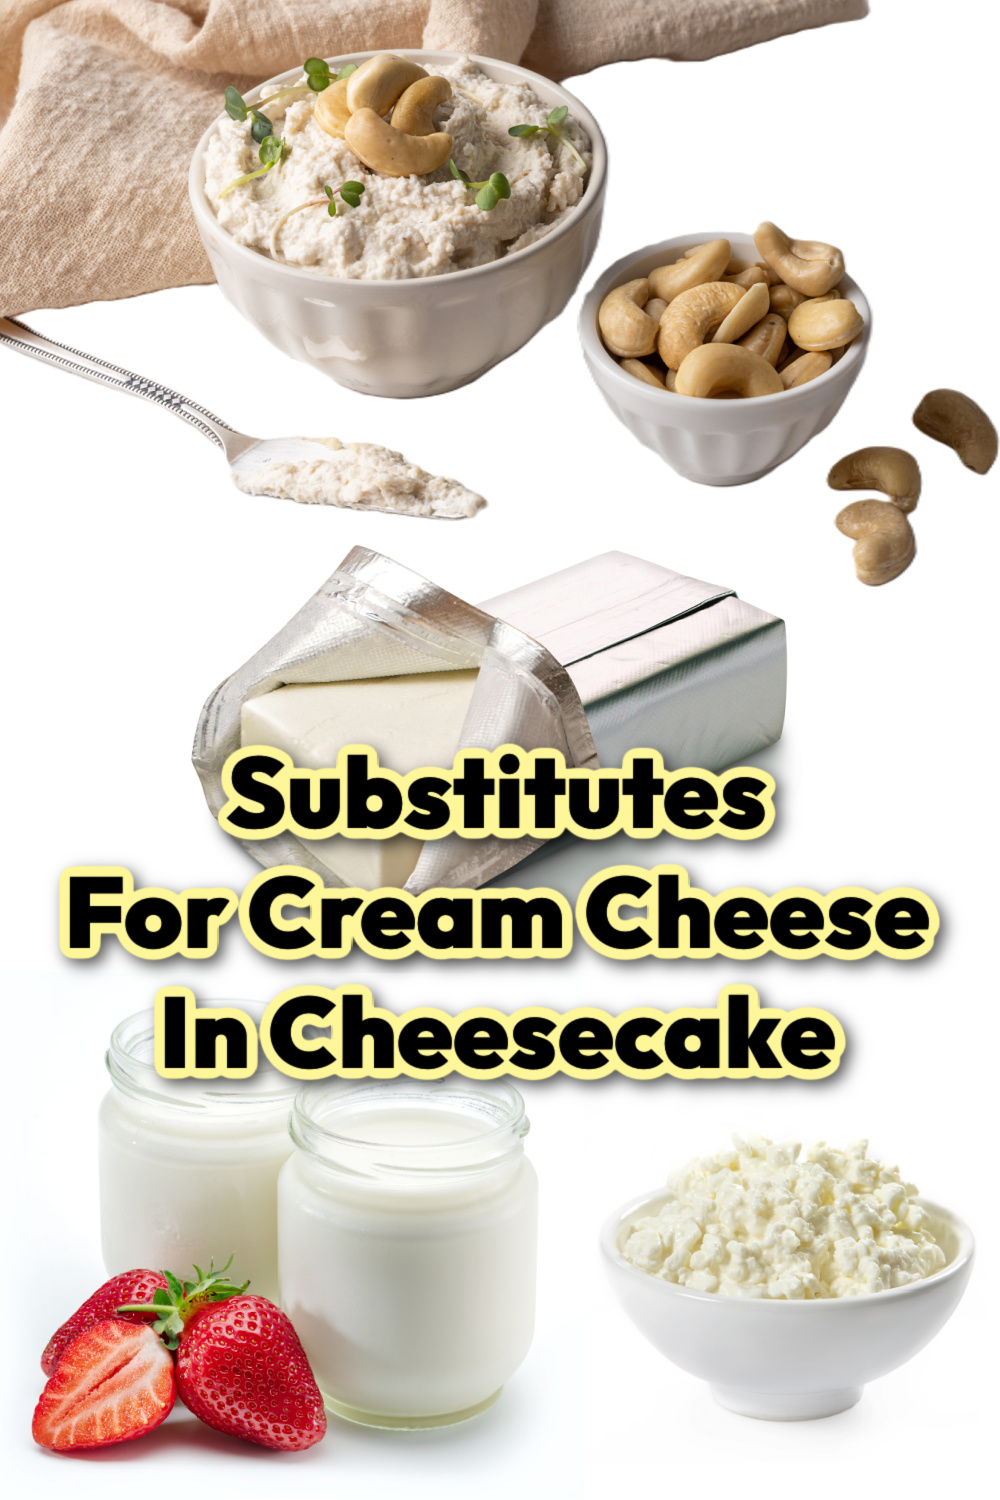 Different items to use for a Substitute For Cream Cheese In Cheesecake with text overlay at bottom.